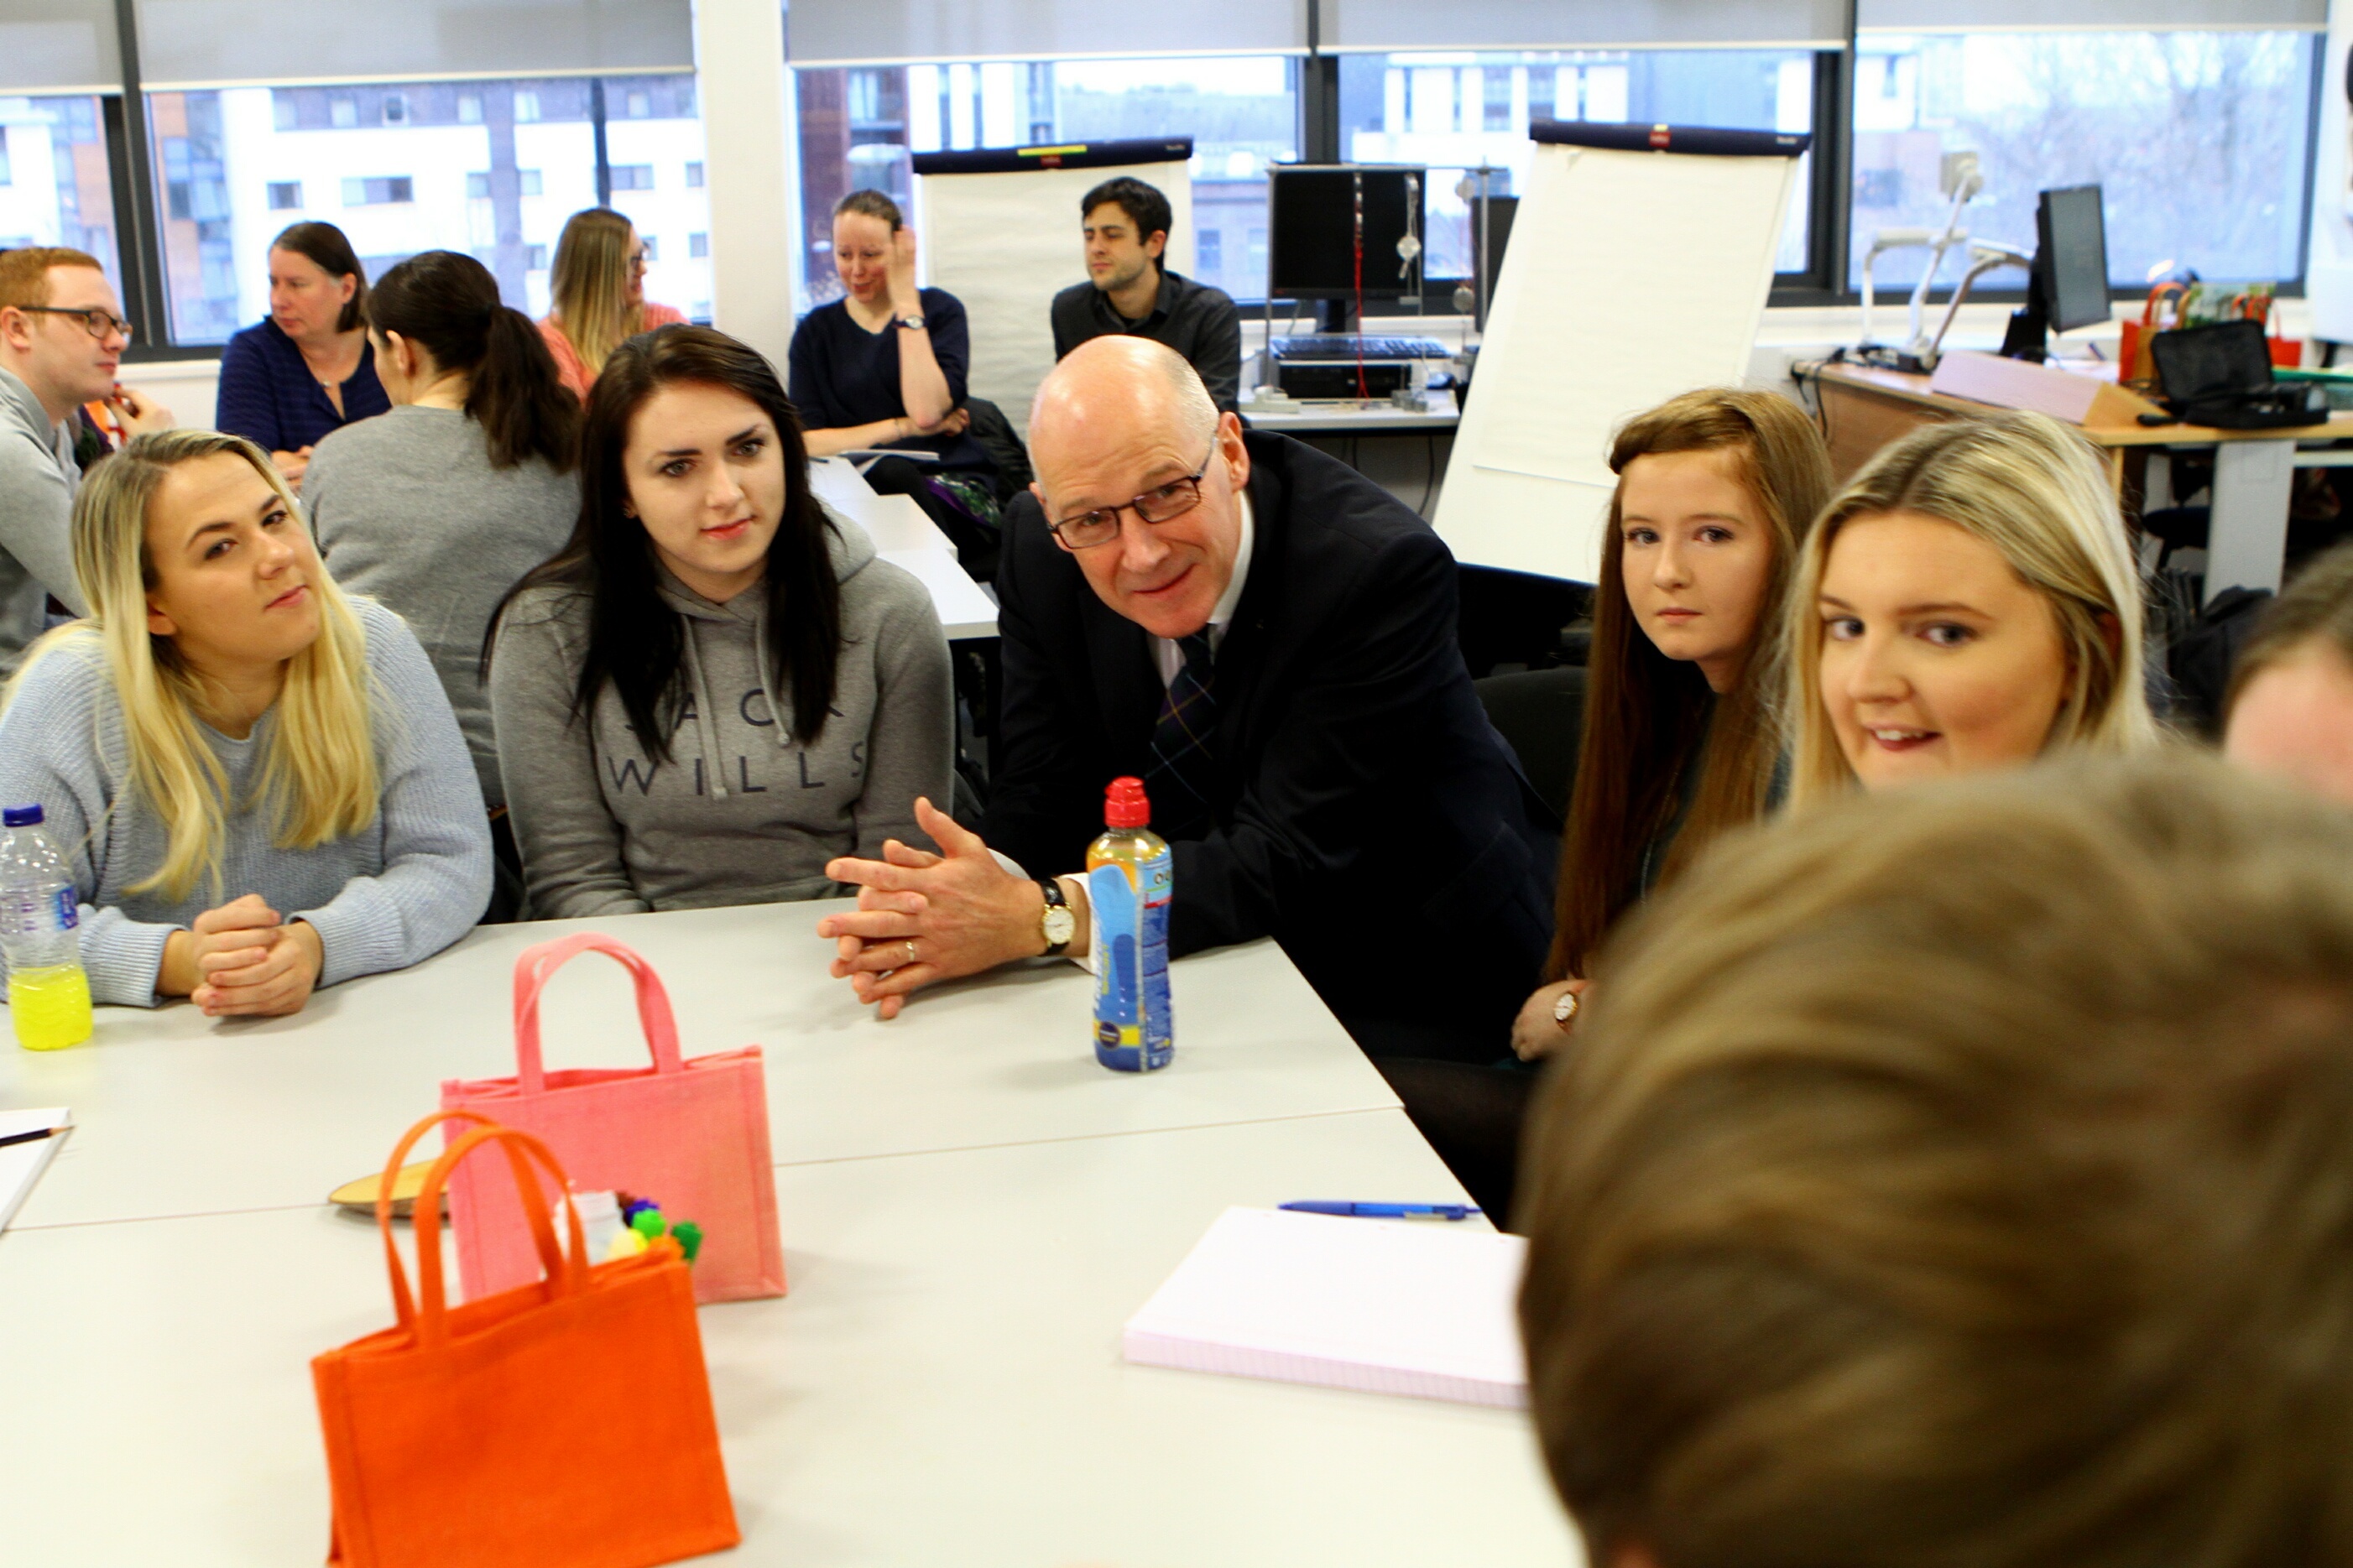 Mr Swinney wants more students to consider a career in teaching.